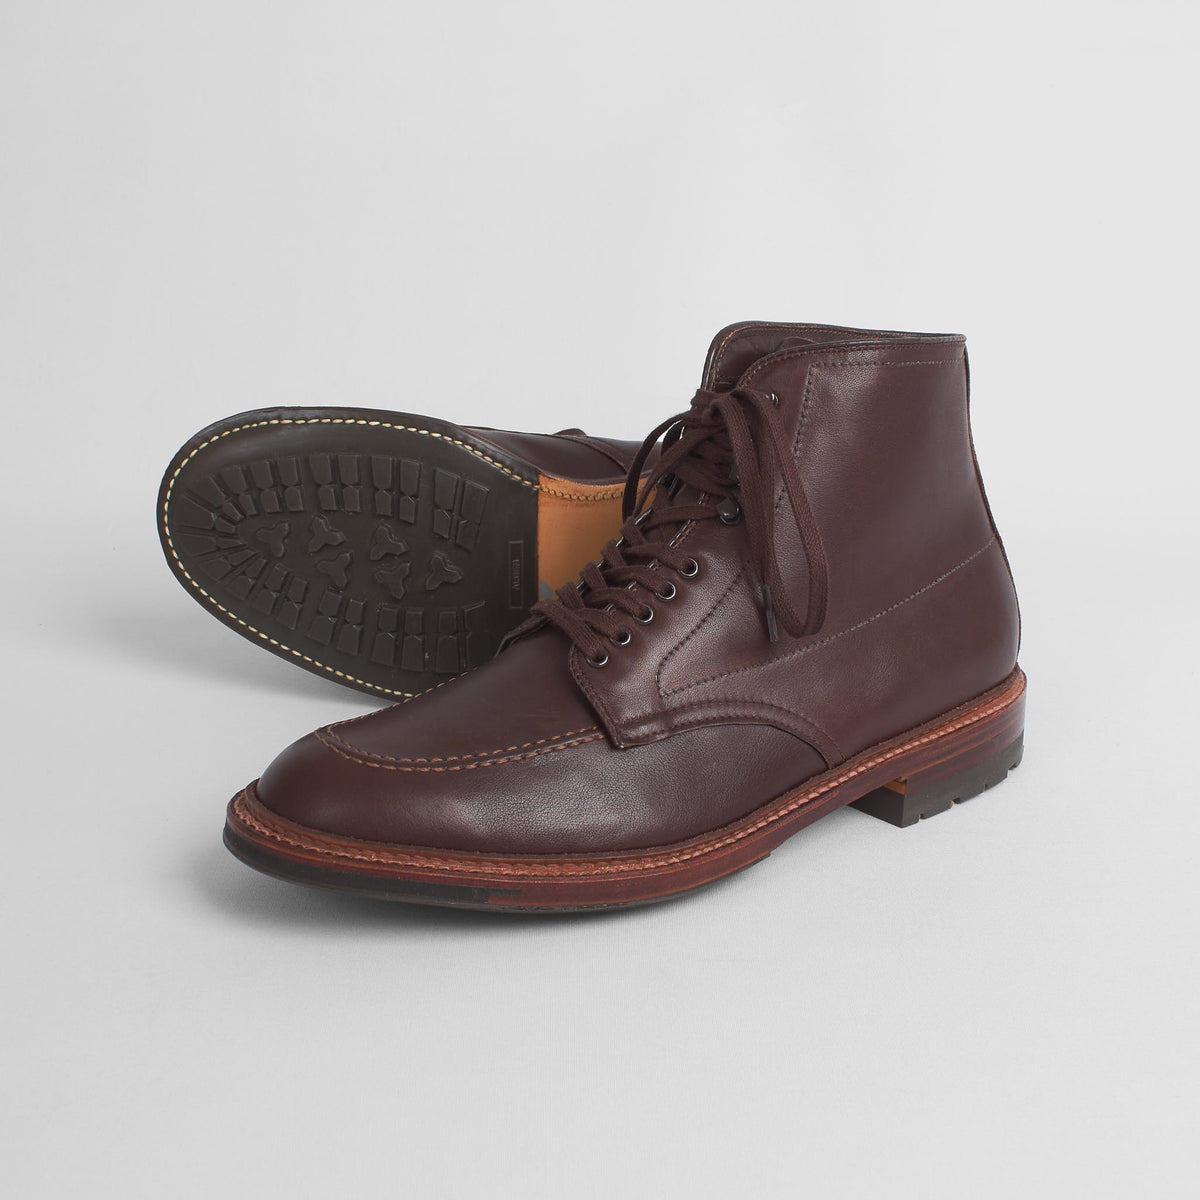 Alden Indy Boot with Commando Sole